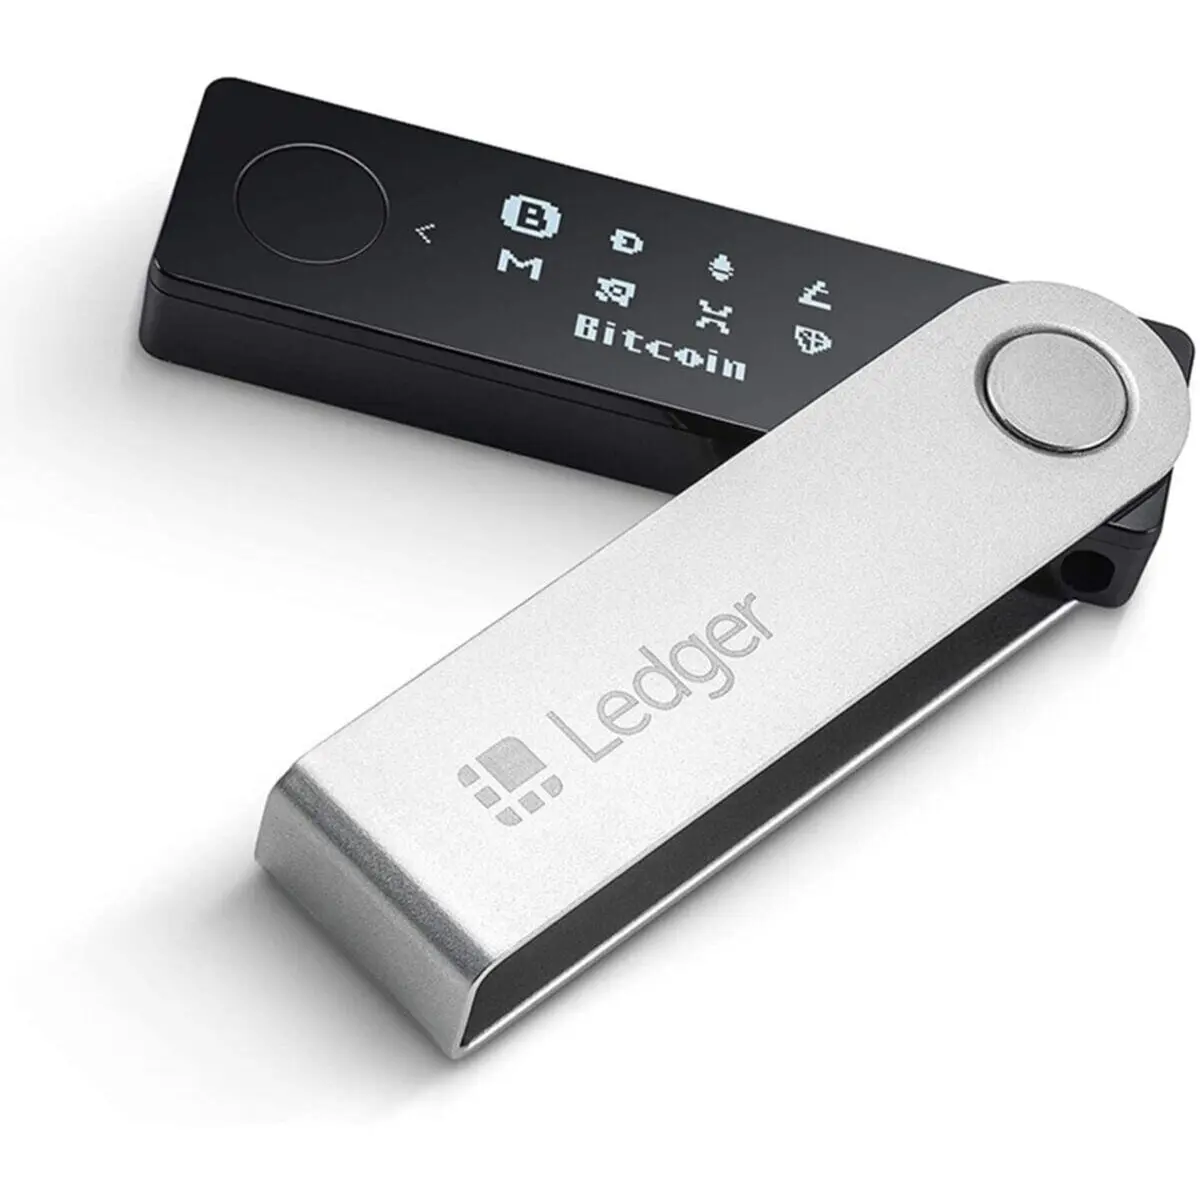 How To Setup And Use Your Ledger Nano S With Ledger Live – The Crypto Merchant